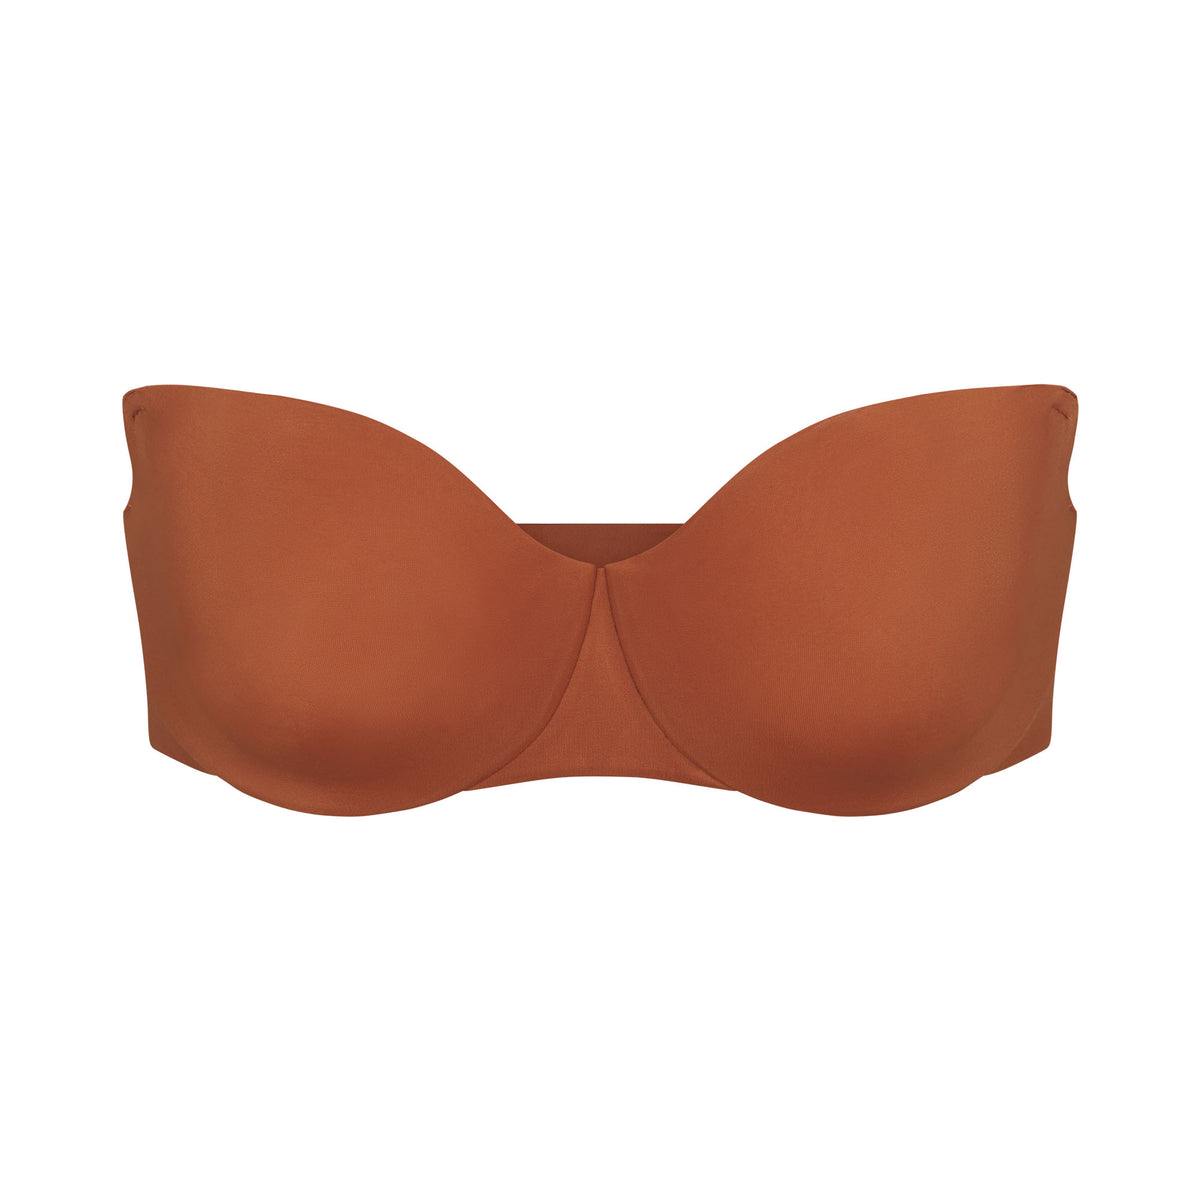 Best bras for every shape and need, according to an expert - Good Morning  America